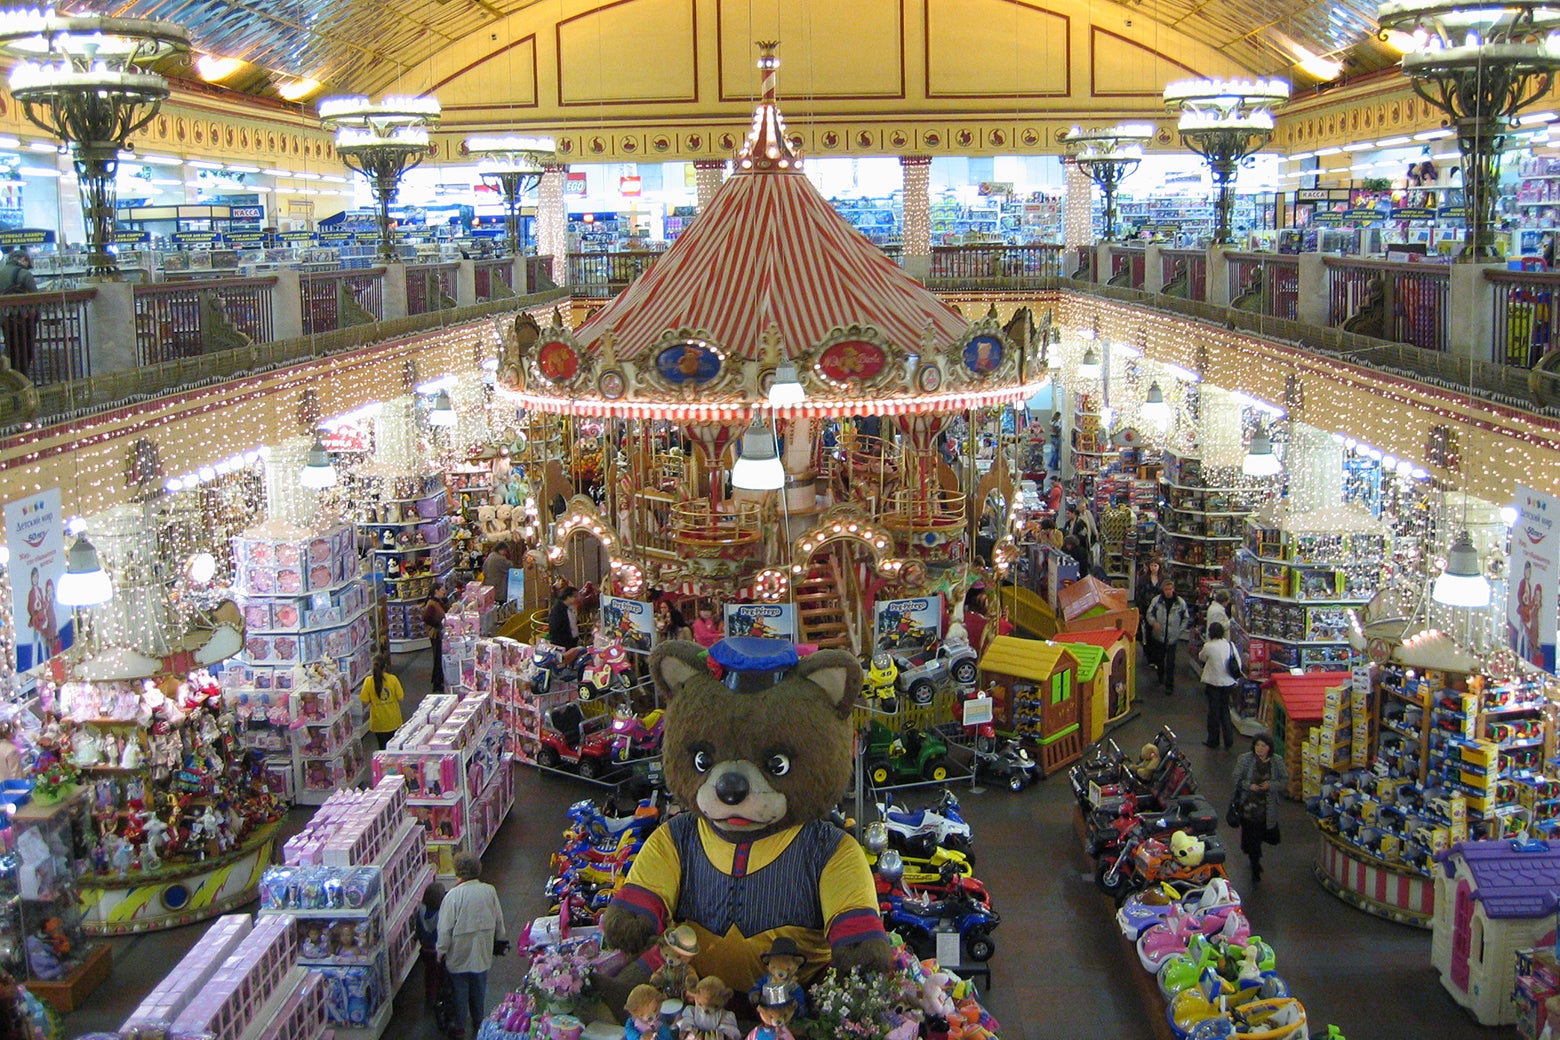 The interior of the Detsky Mir department store, featuring a merry-go-round and a giant teddy bear.